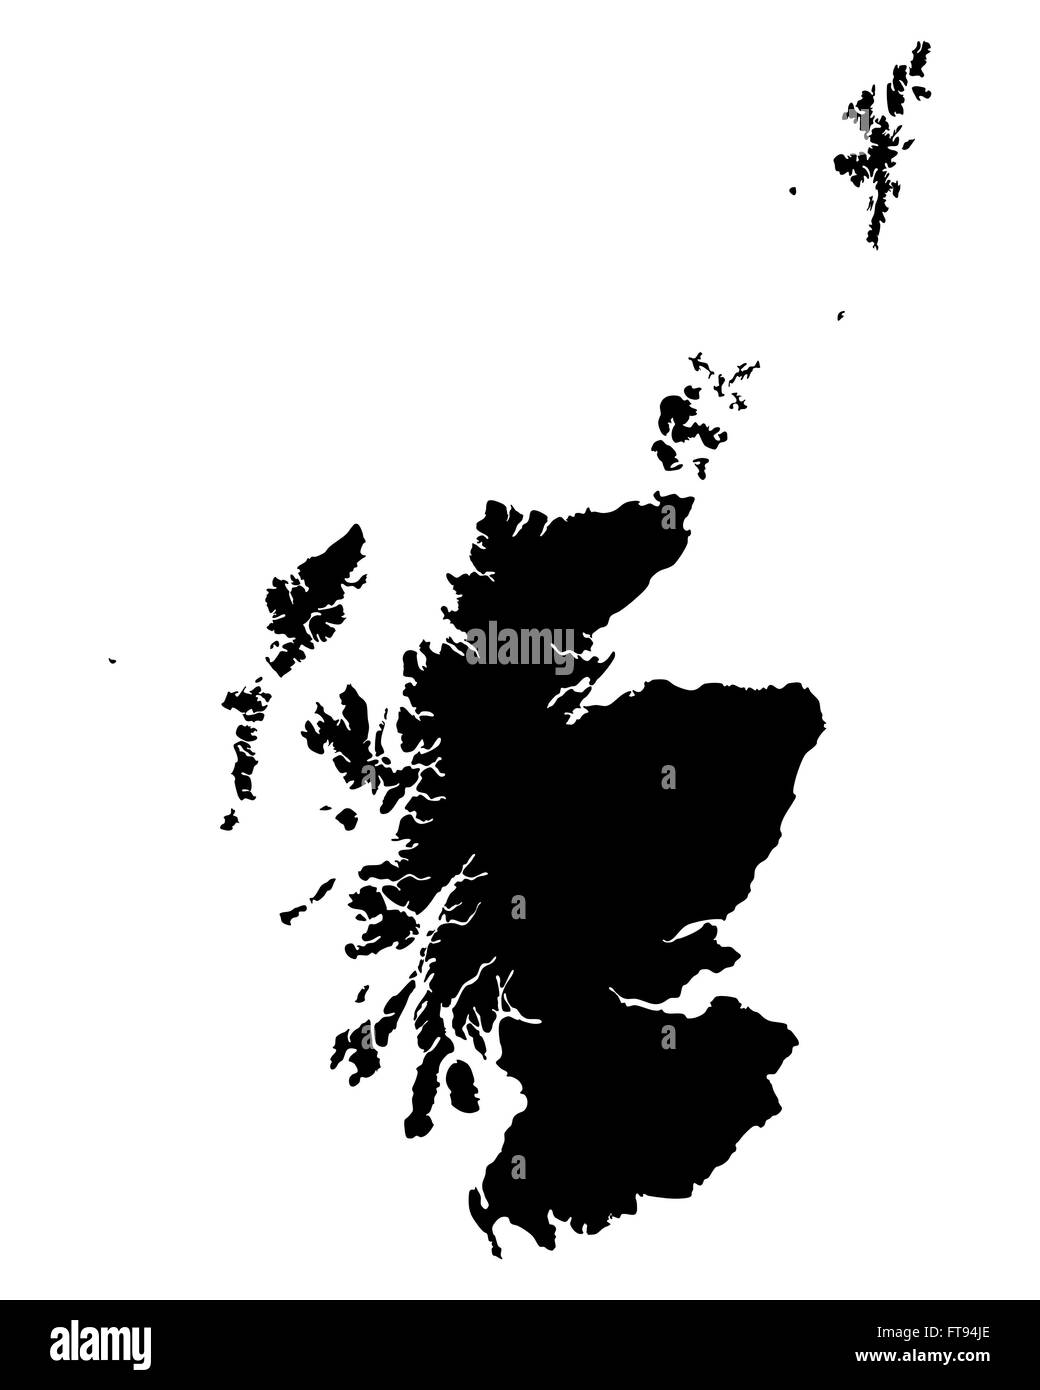 Scotland map black and white stock photos images